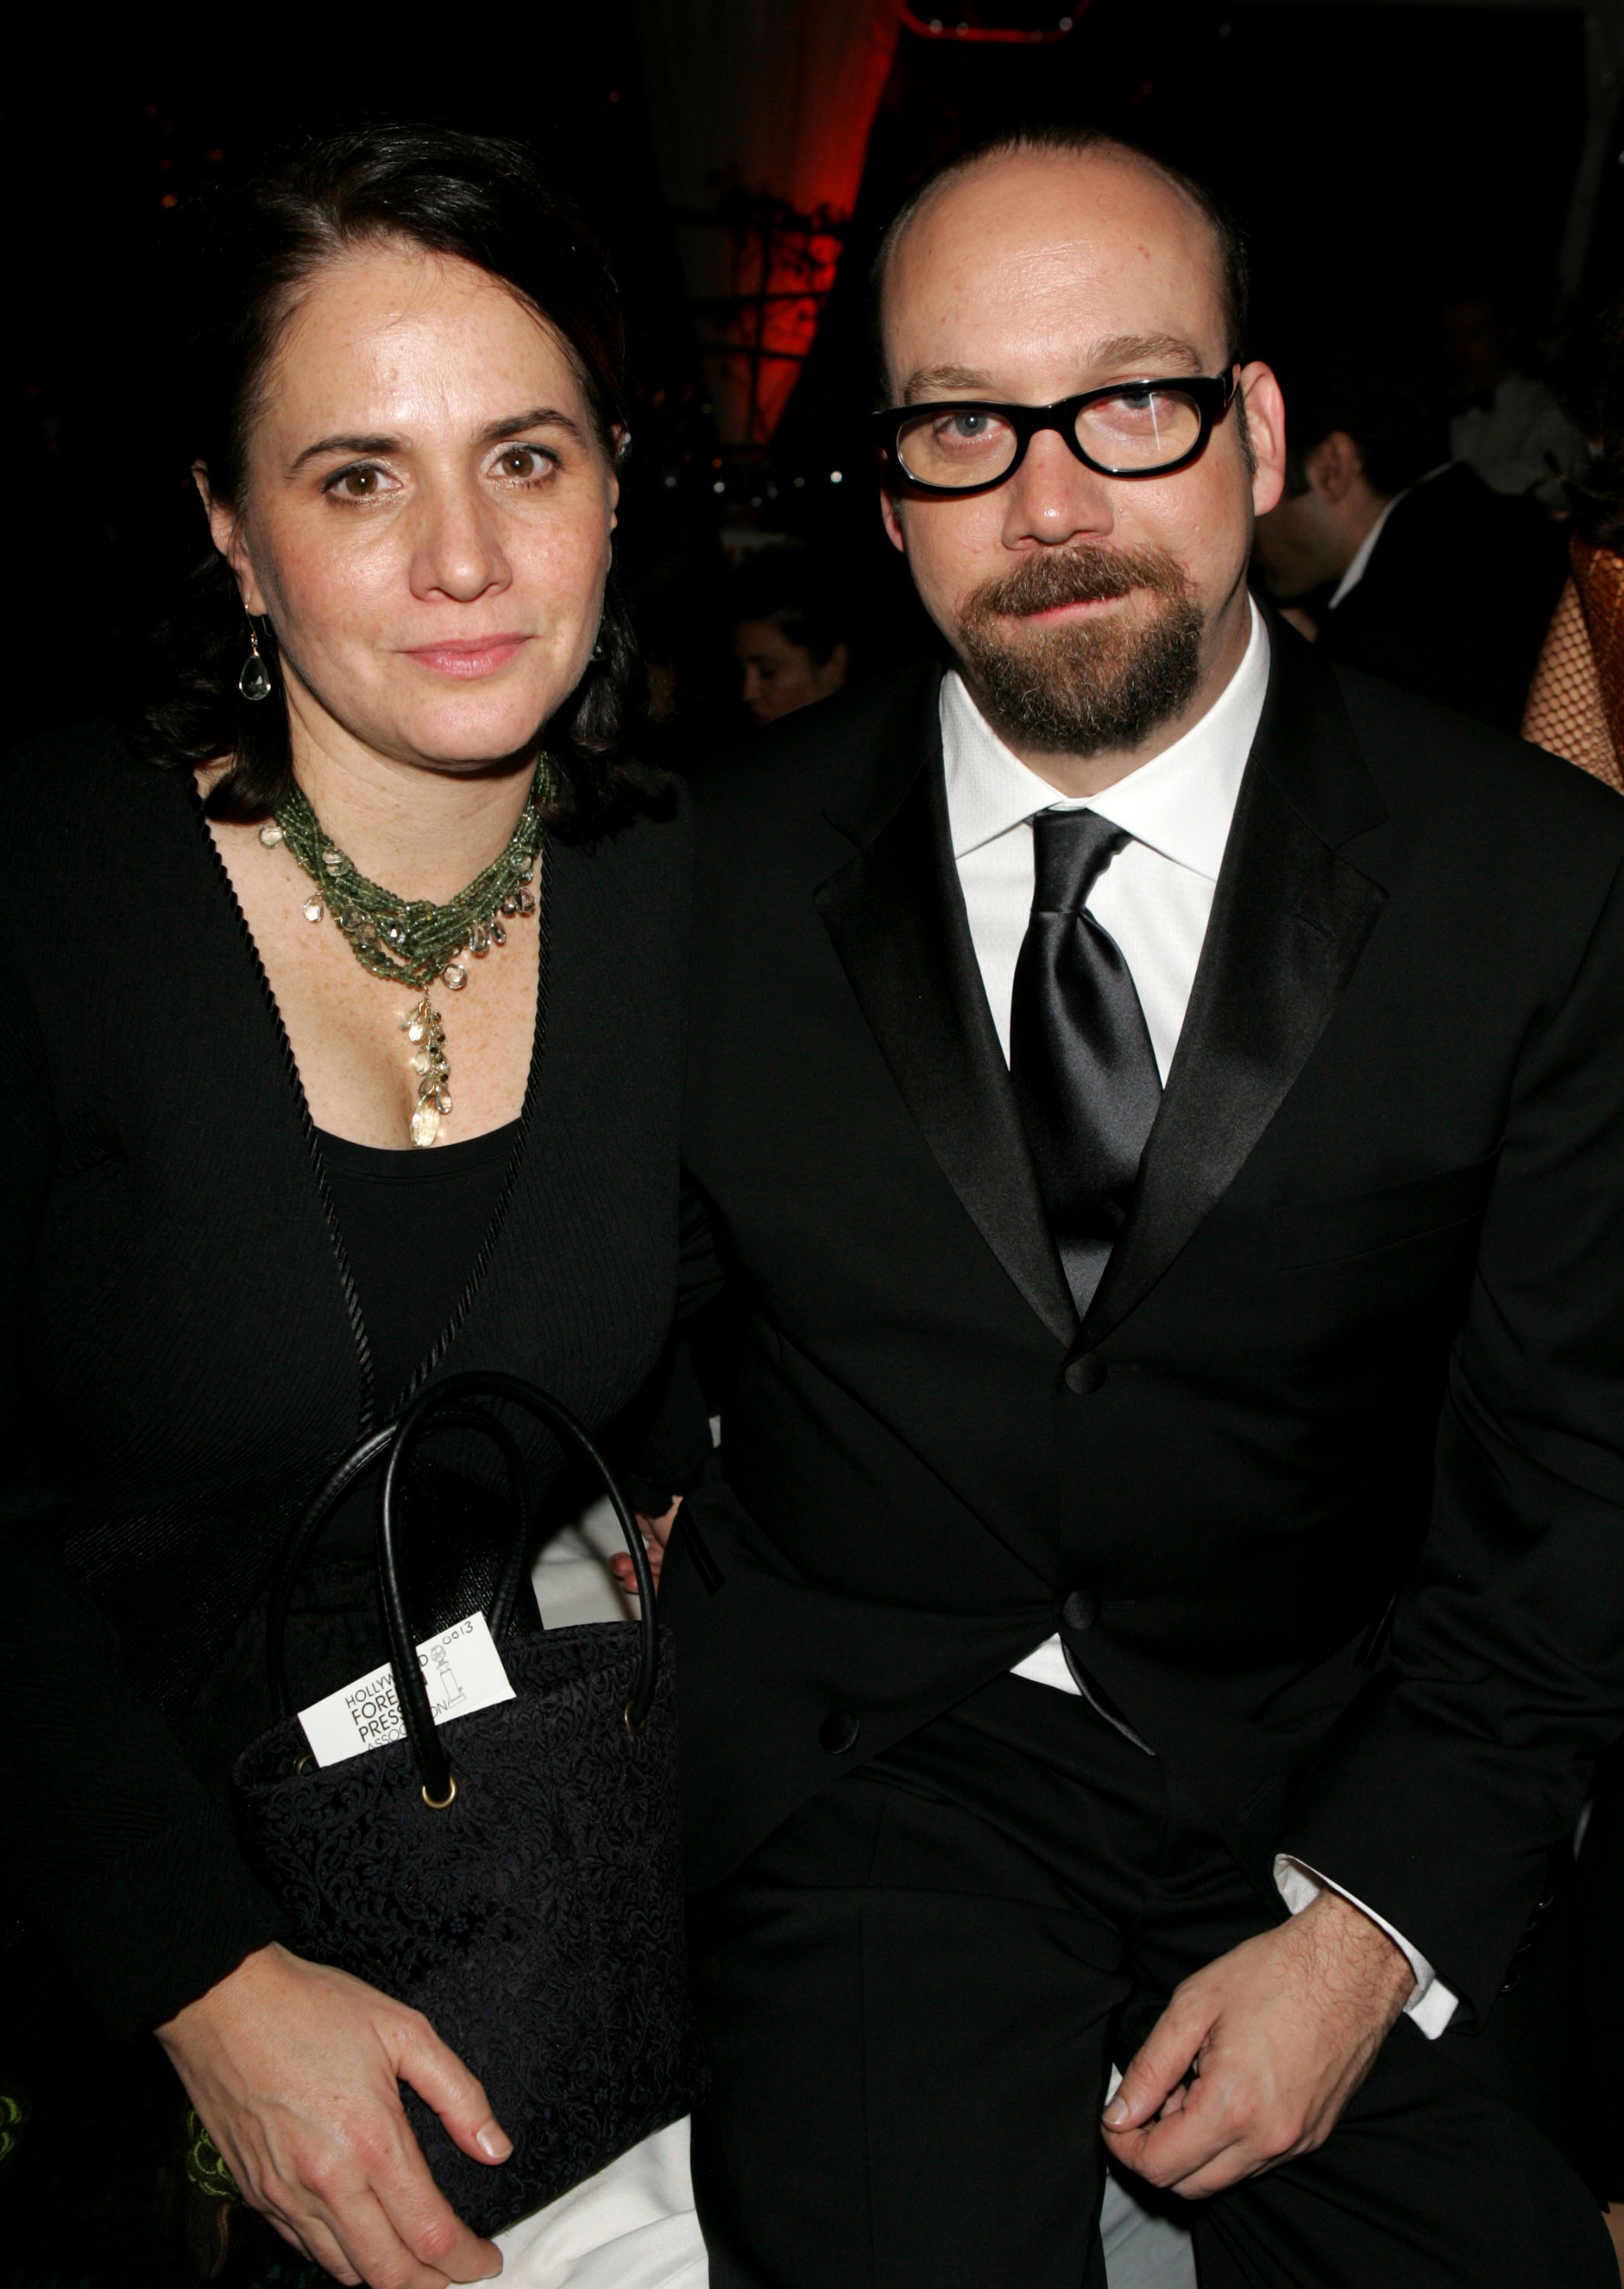 Paul Giamatti and Elizabeth Cohen Giamatti pose at the Fox Golden Globe After Party at the Beverly Hilton Hotel on January 16, 2004, in Beverly Hills, California. | Source: Getty Images